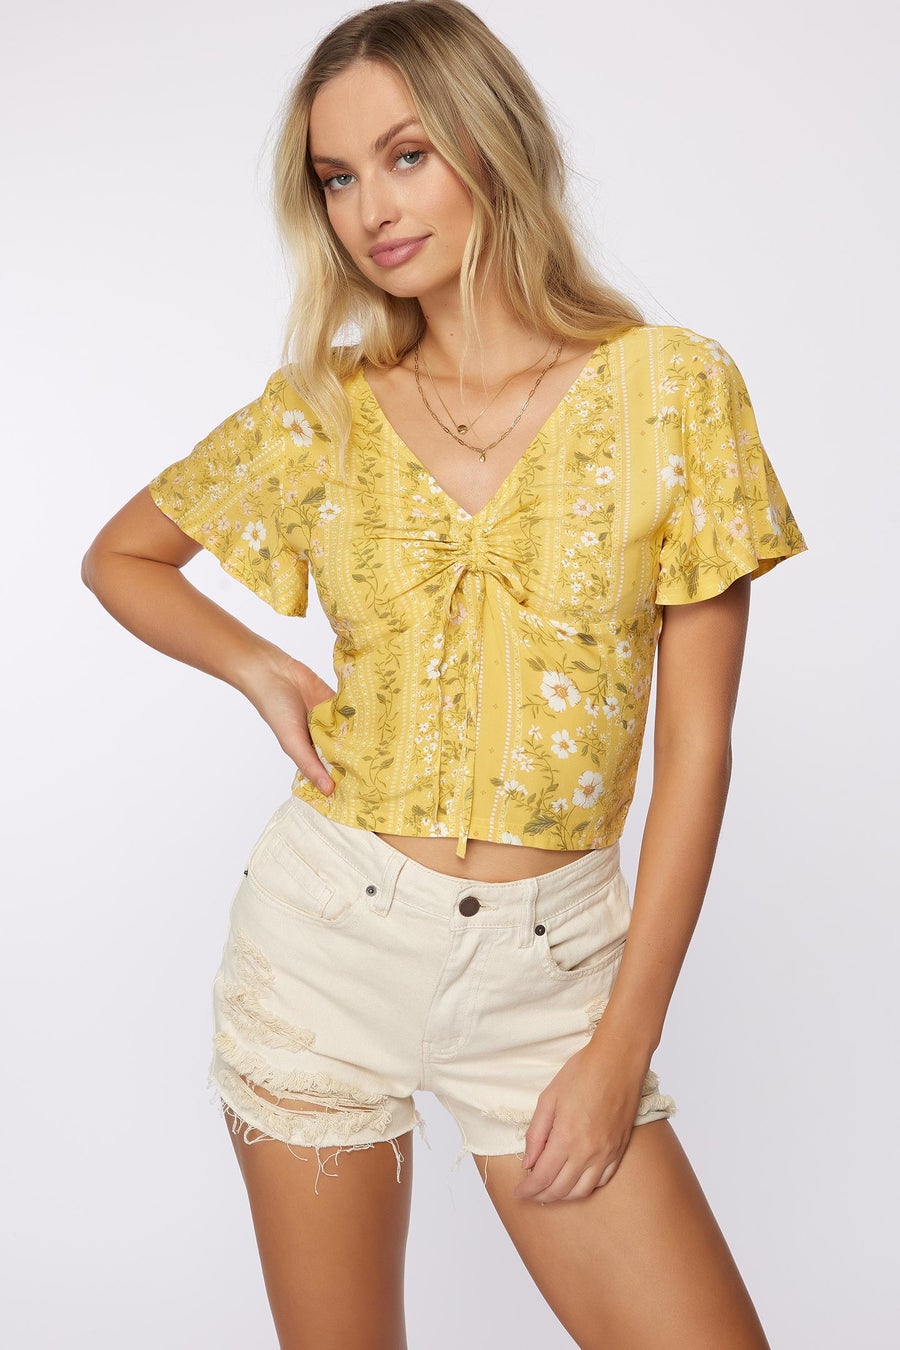 O'Neill Karly Top